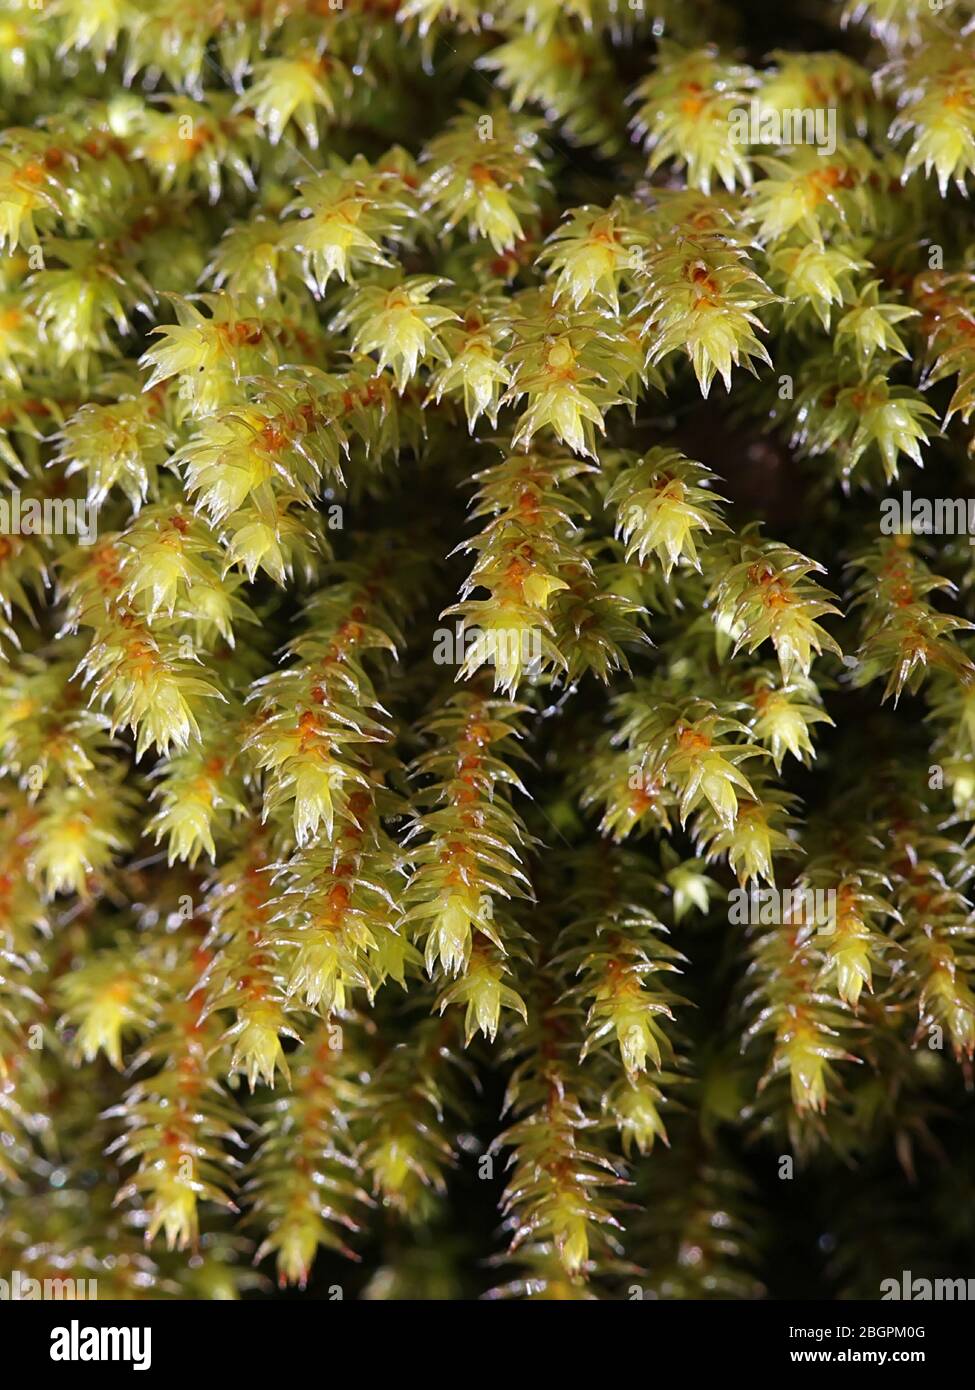 Hedwigia ciliata, known as fringed hoar-moss or white-tipped moss Hedwigia ciliata Stock Photo